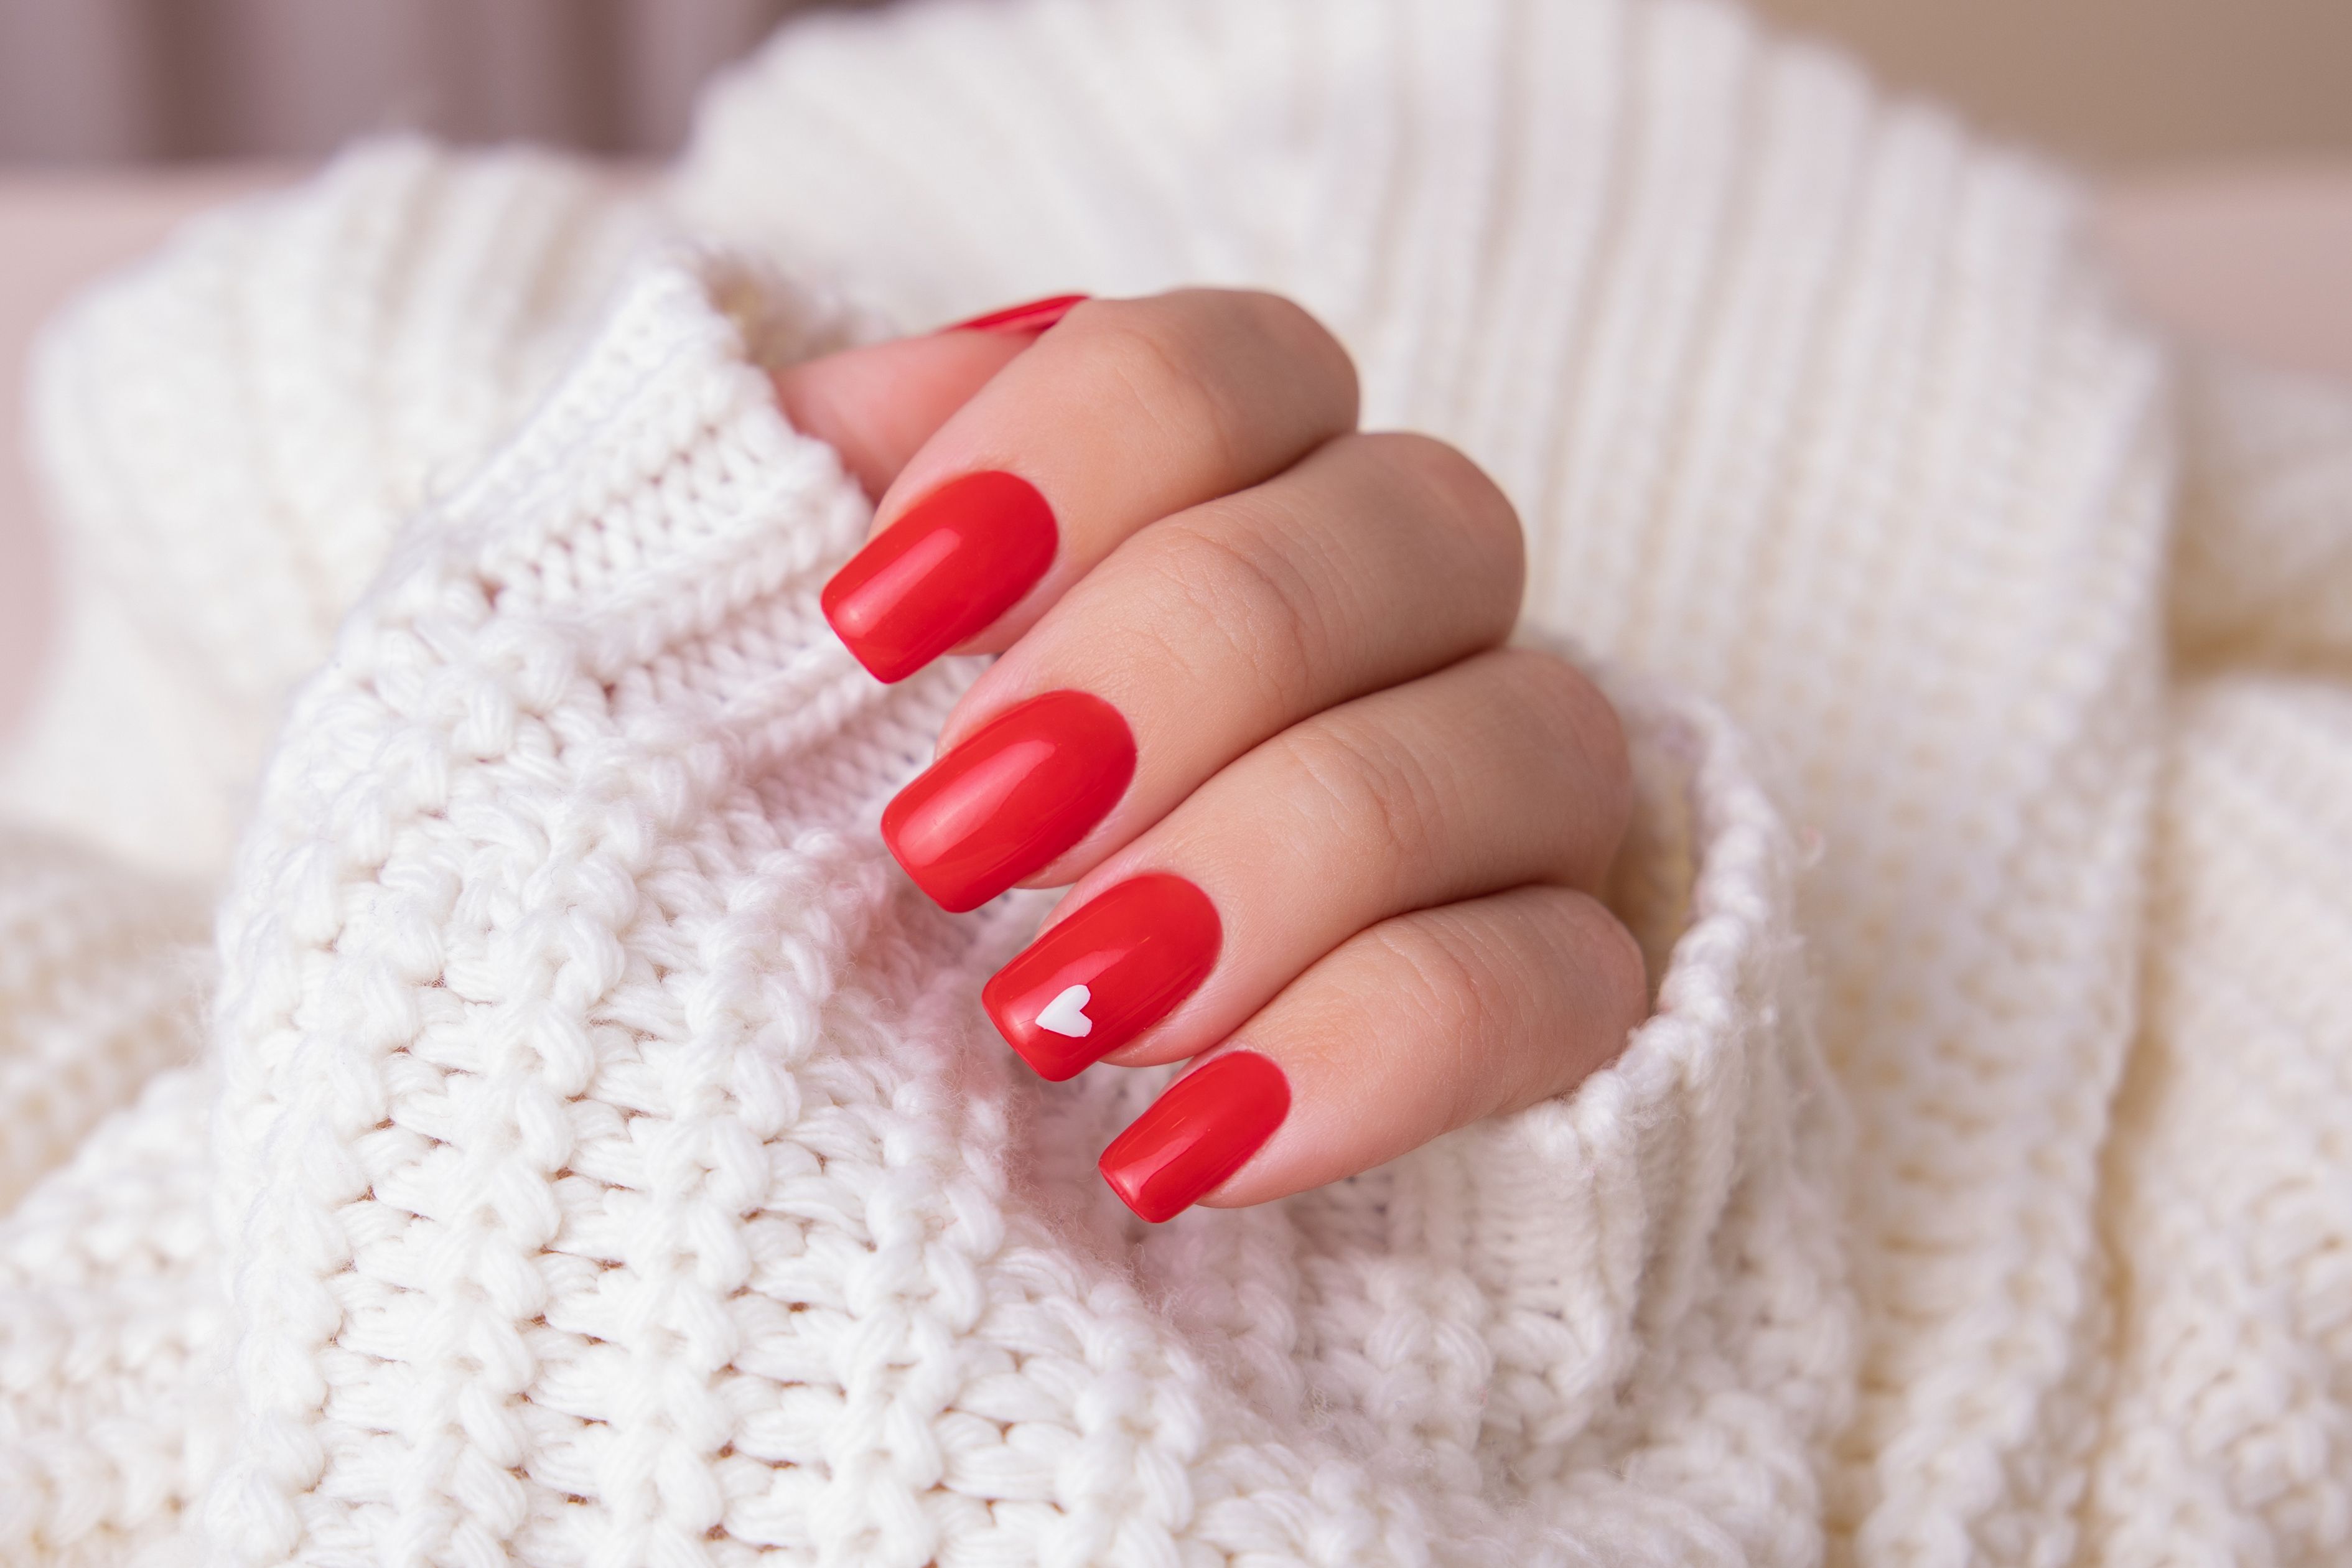 female hand with red manicure nails hearts design royalty free image